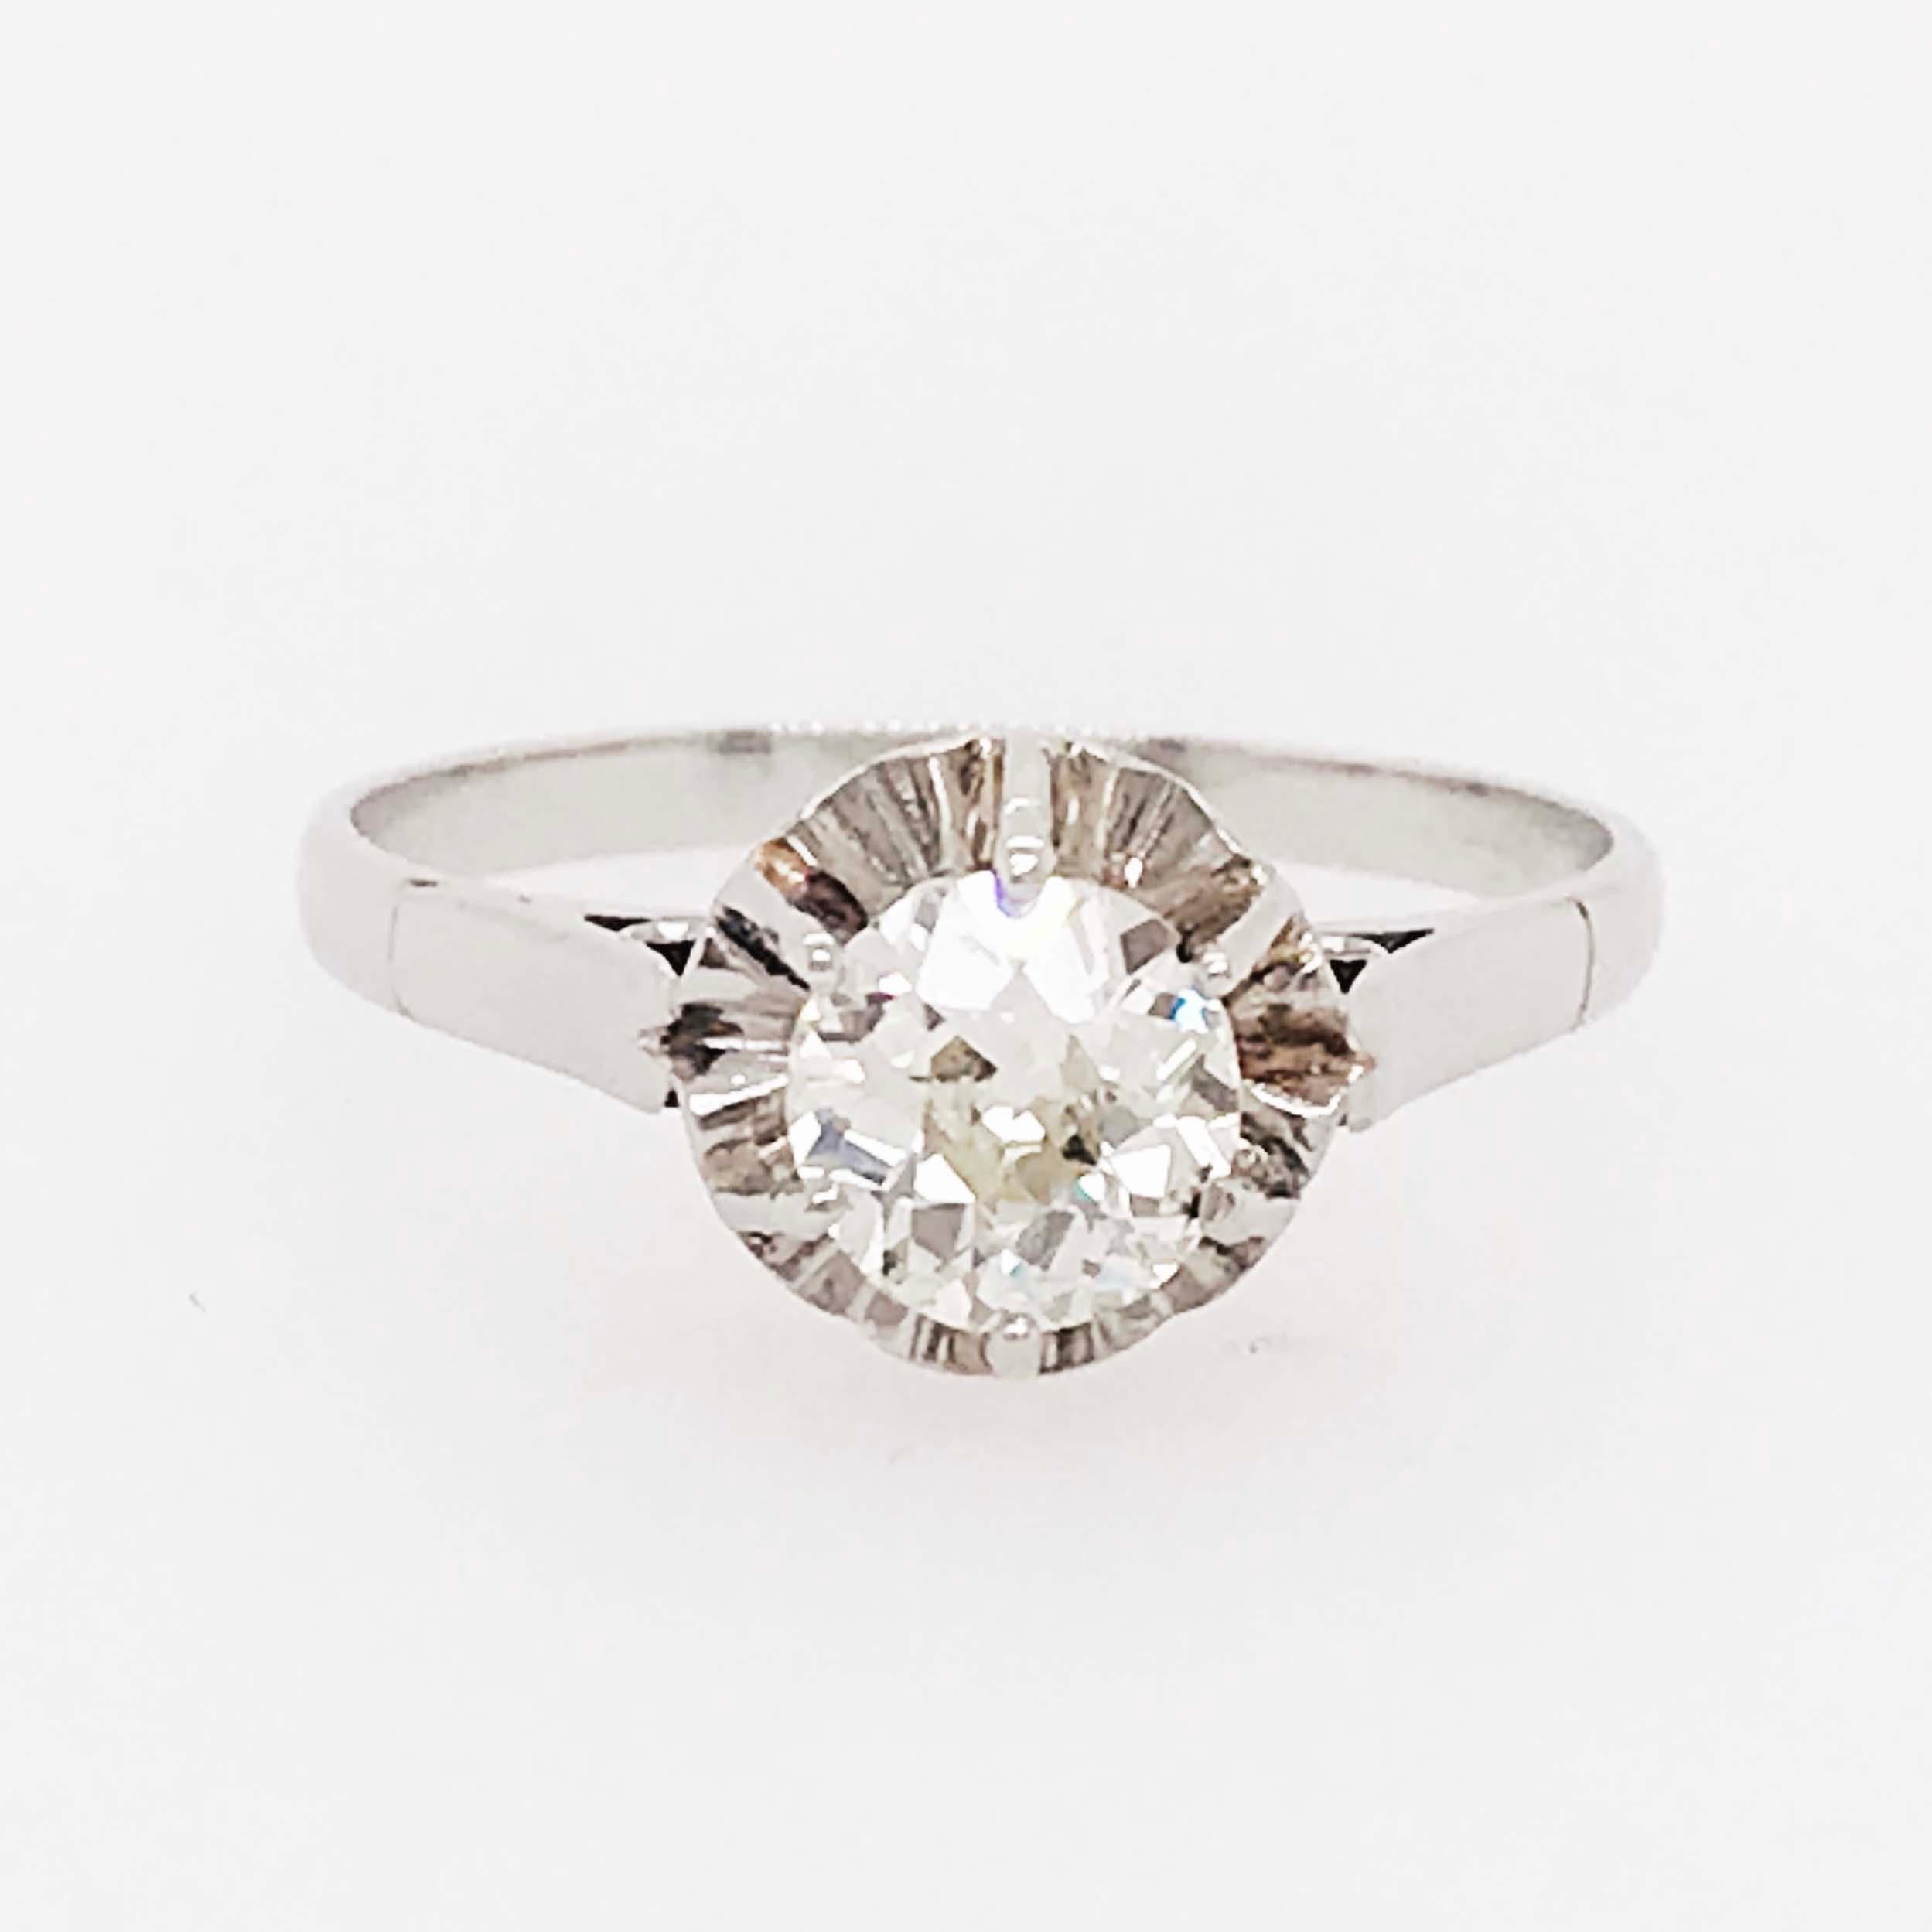 This is a truly unique diamond solitaire engagement ring! With a natural and genuine Old European cut Diamond set in six prongs. The old European cut diamond is breathtaking and such a great size! Weighing approximately 0.75 carats with SI-1 clarity